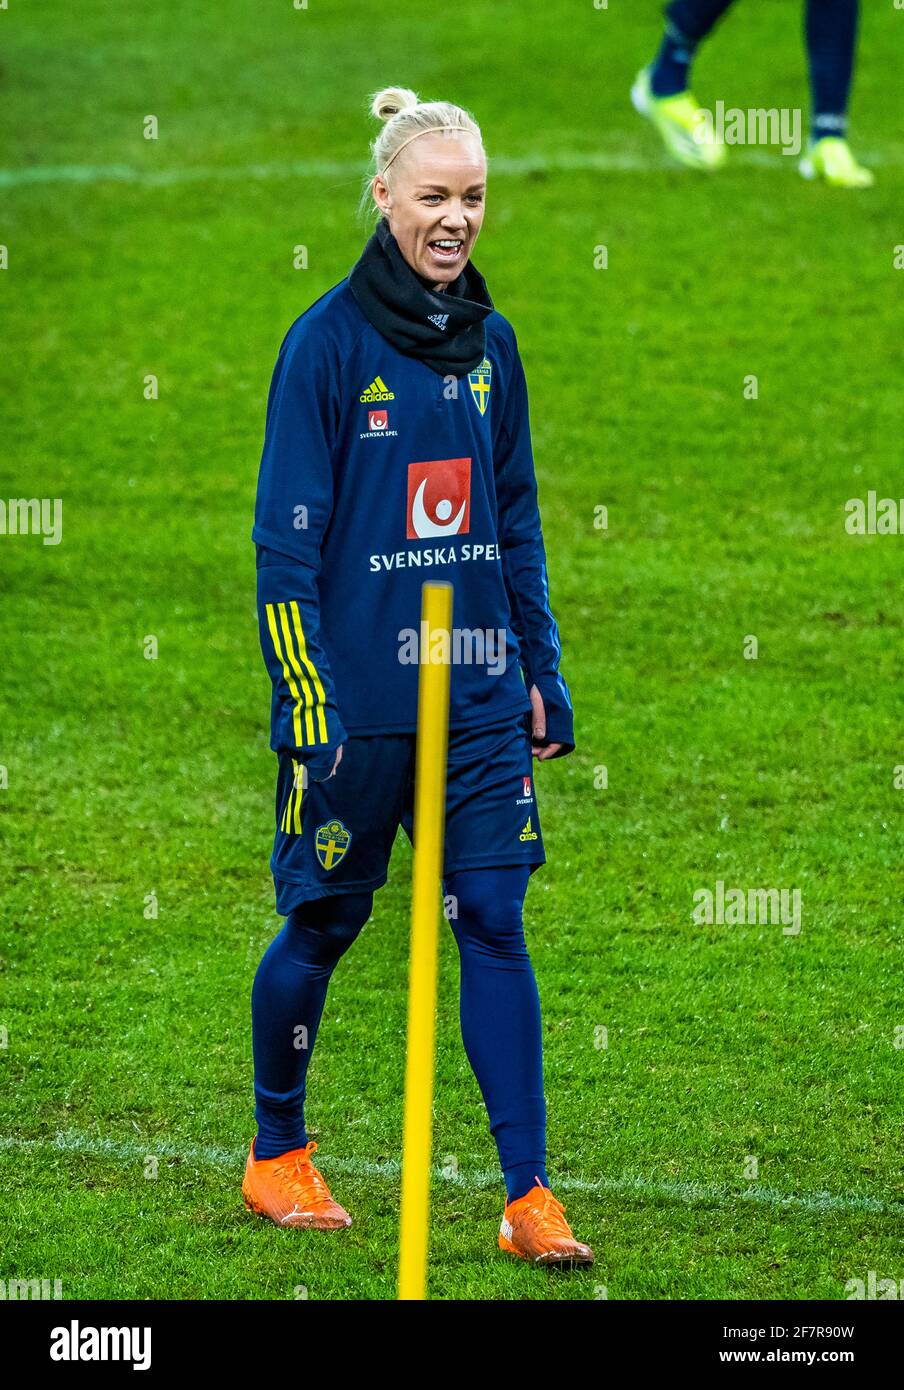 SOLNA  20210409 Sweden's forward and captain Carolina Seger in action at  the women's national team's training session at Friends arena on Friday April 9,2021, prior the friendly international game against the USA on Saturday.   Photo: Claudio Bresciani / TT / Kod 10090 Stock Photo